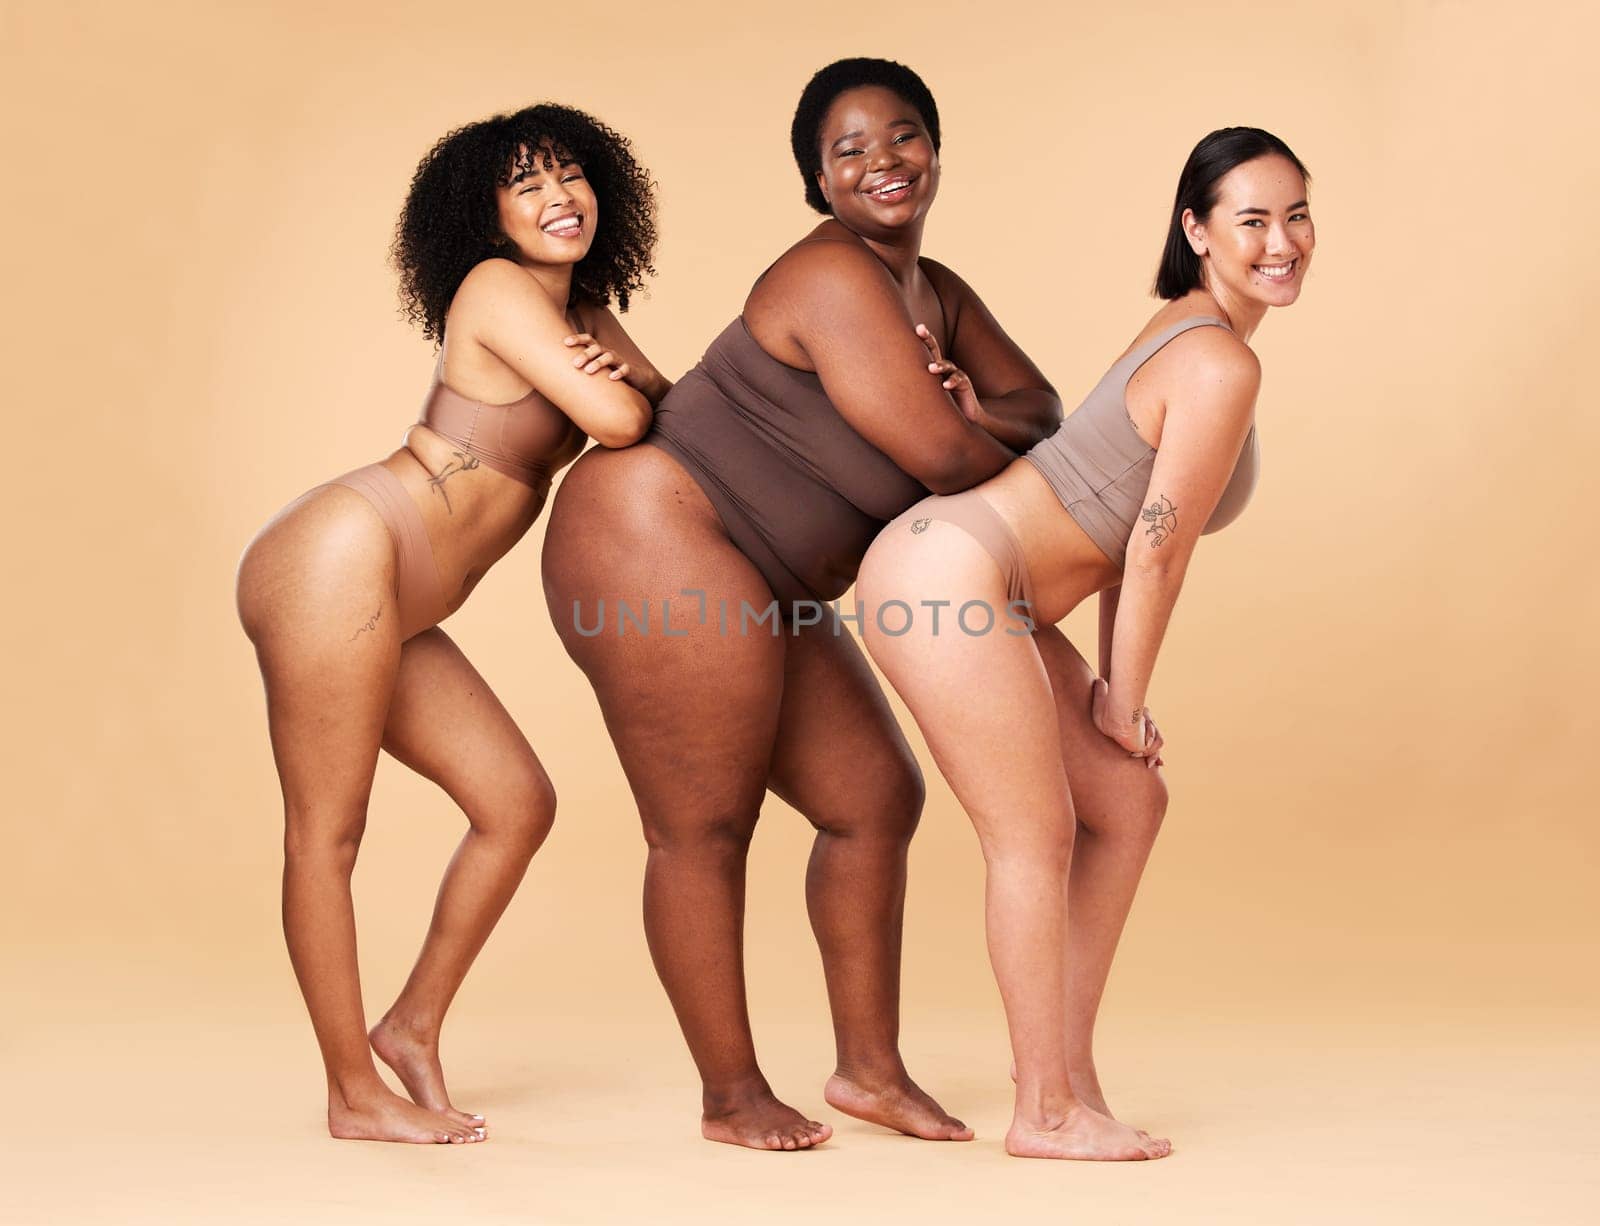 Diversity women, body size and portrait of group together for inclusion, beauty and power. Underwear model friends happy on beige background with cellulite legs, skin pride and self love motivation.